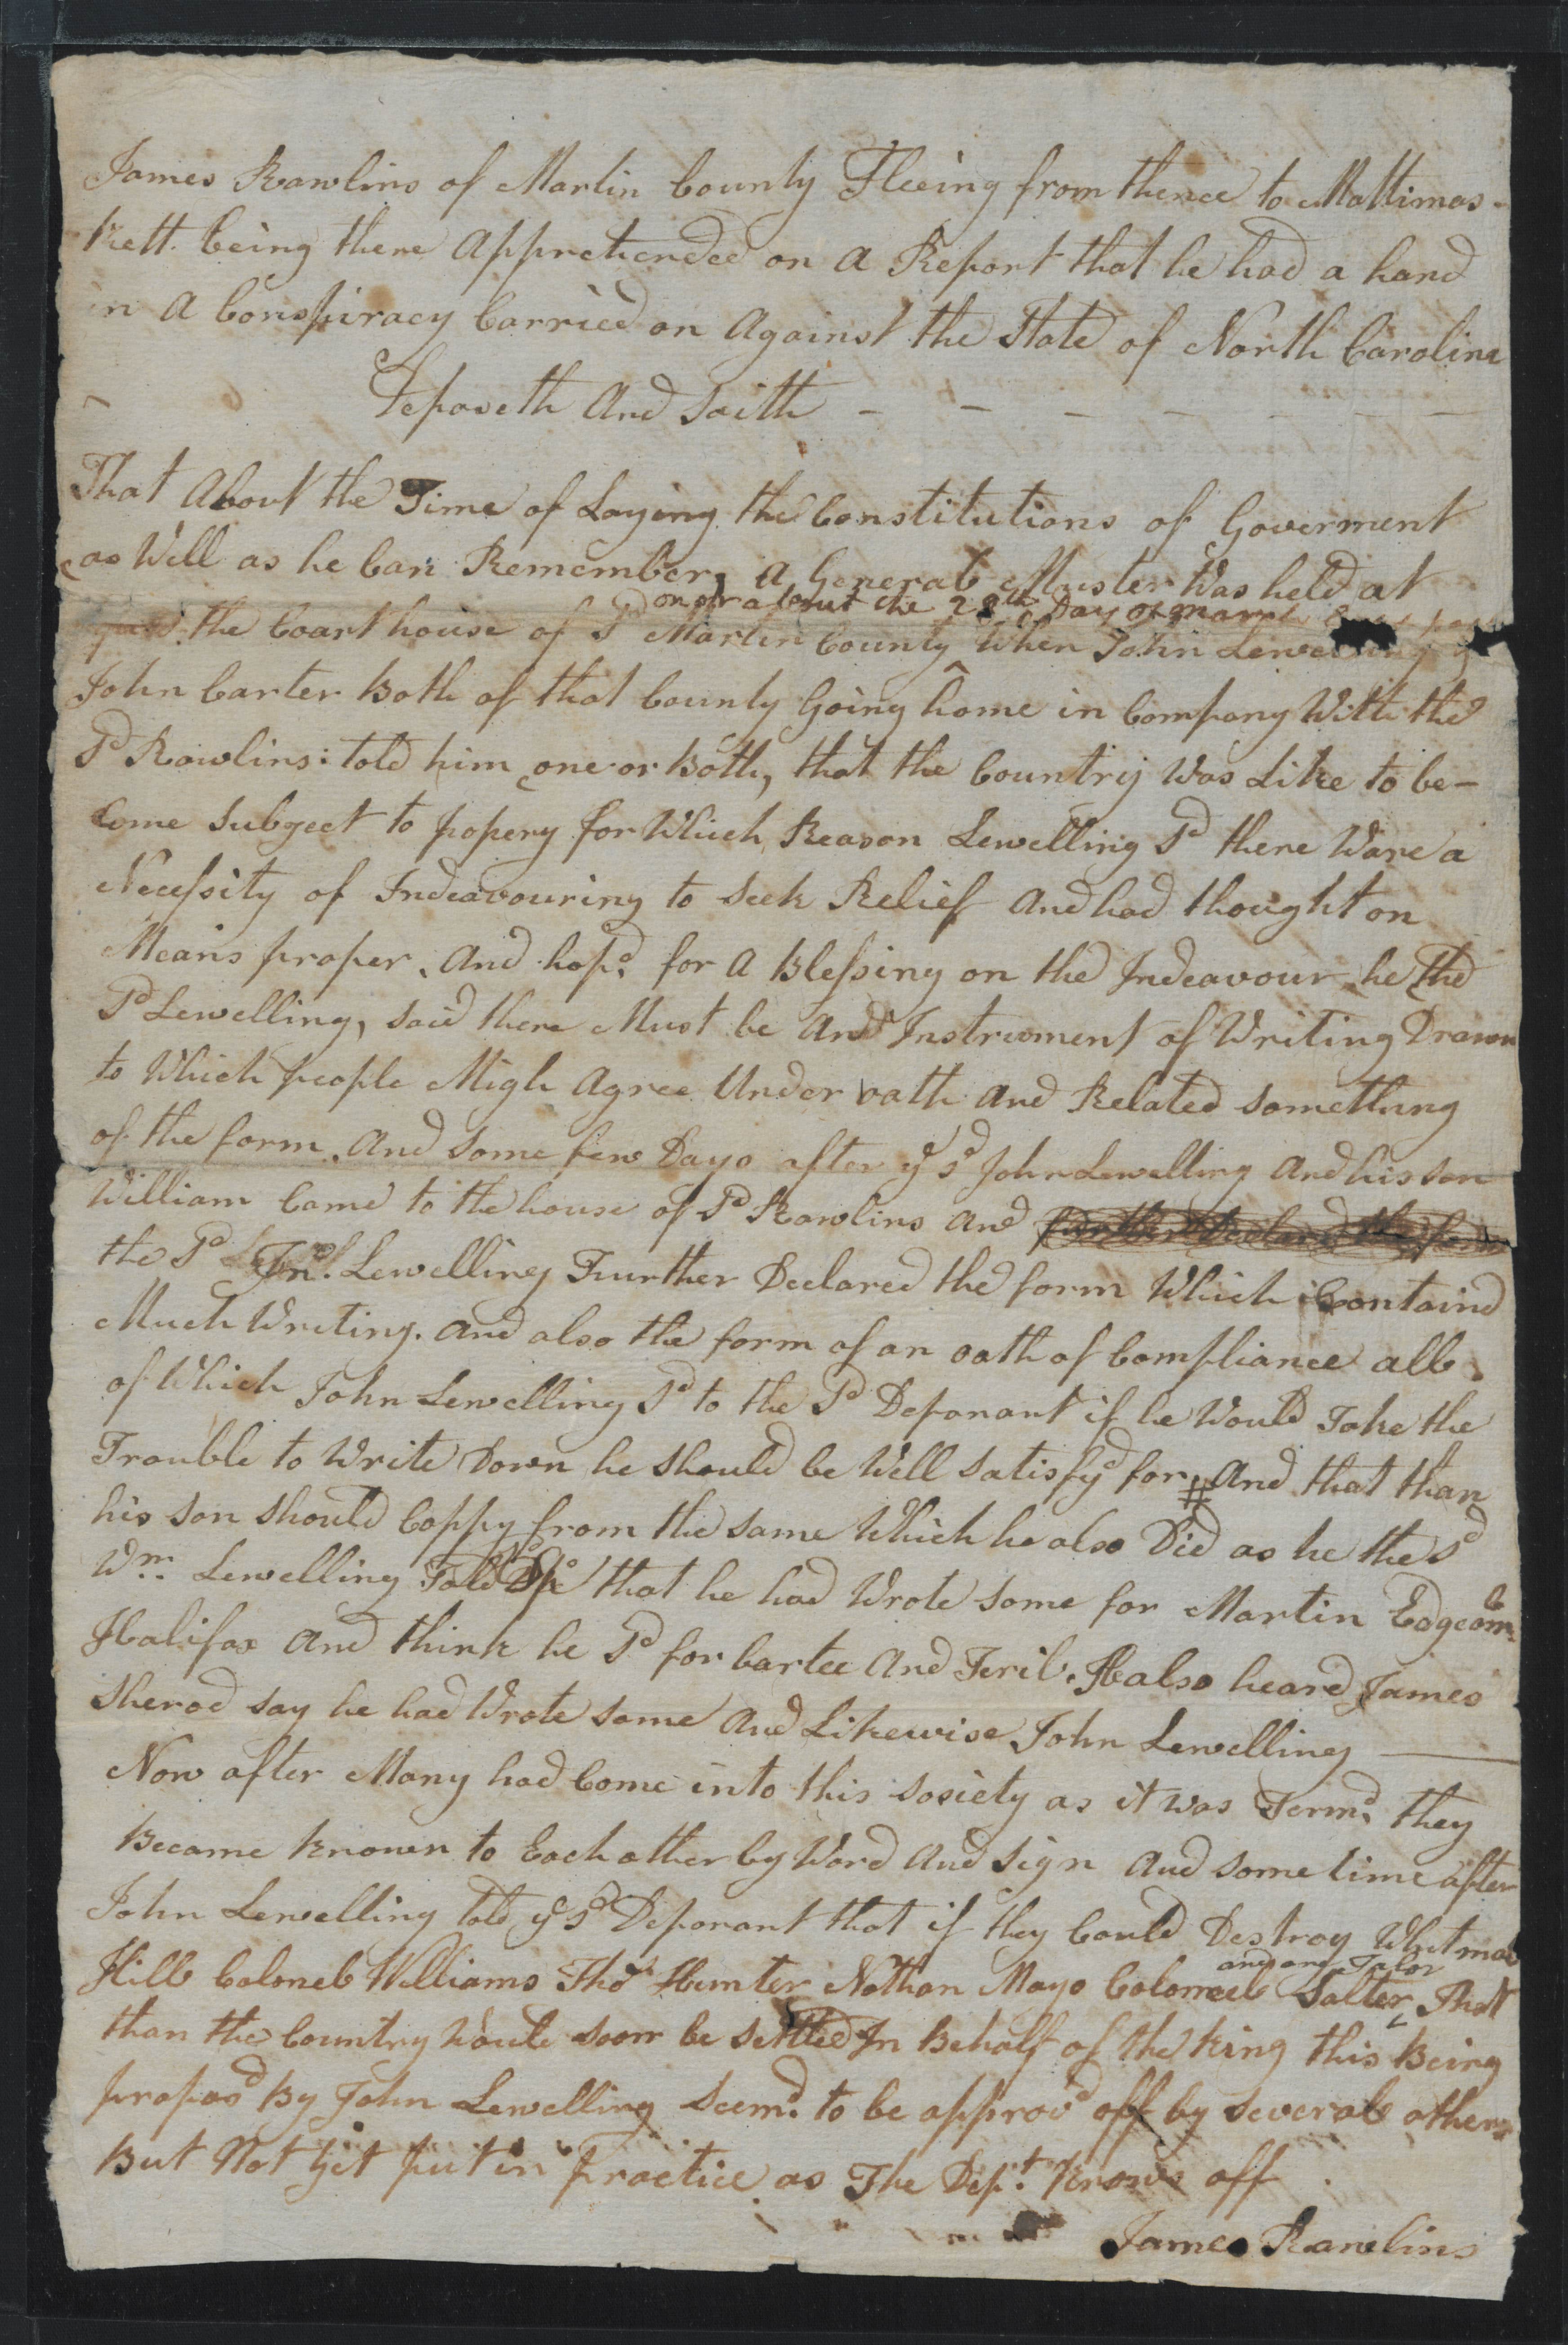 Deposition of James Rawlings, 10 August 1777, page 1